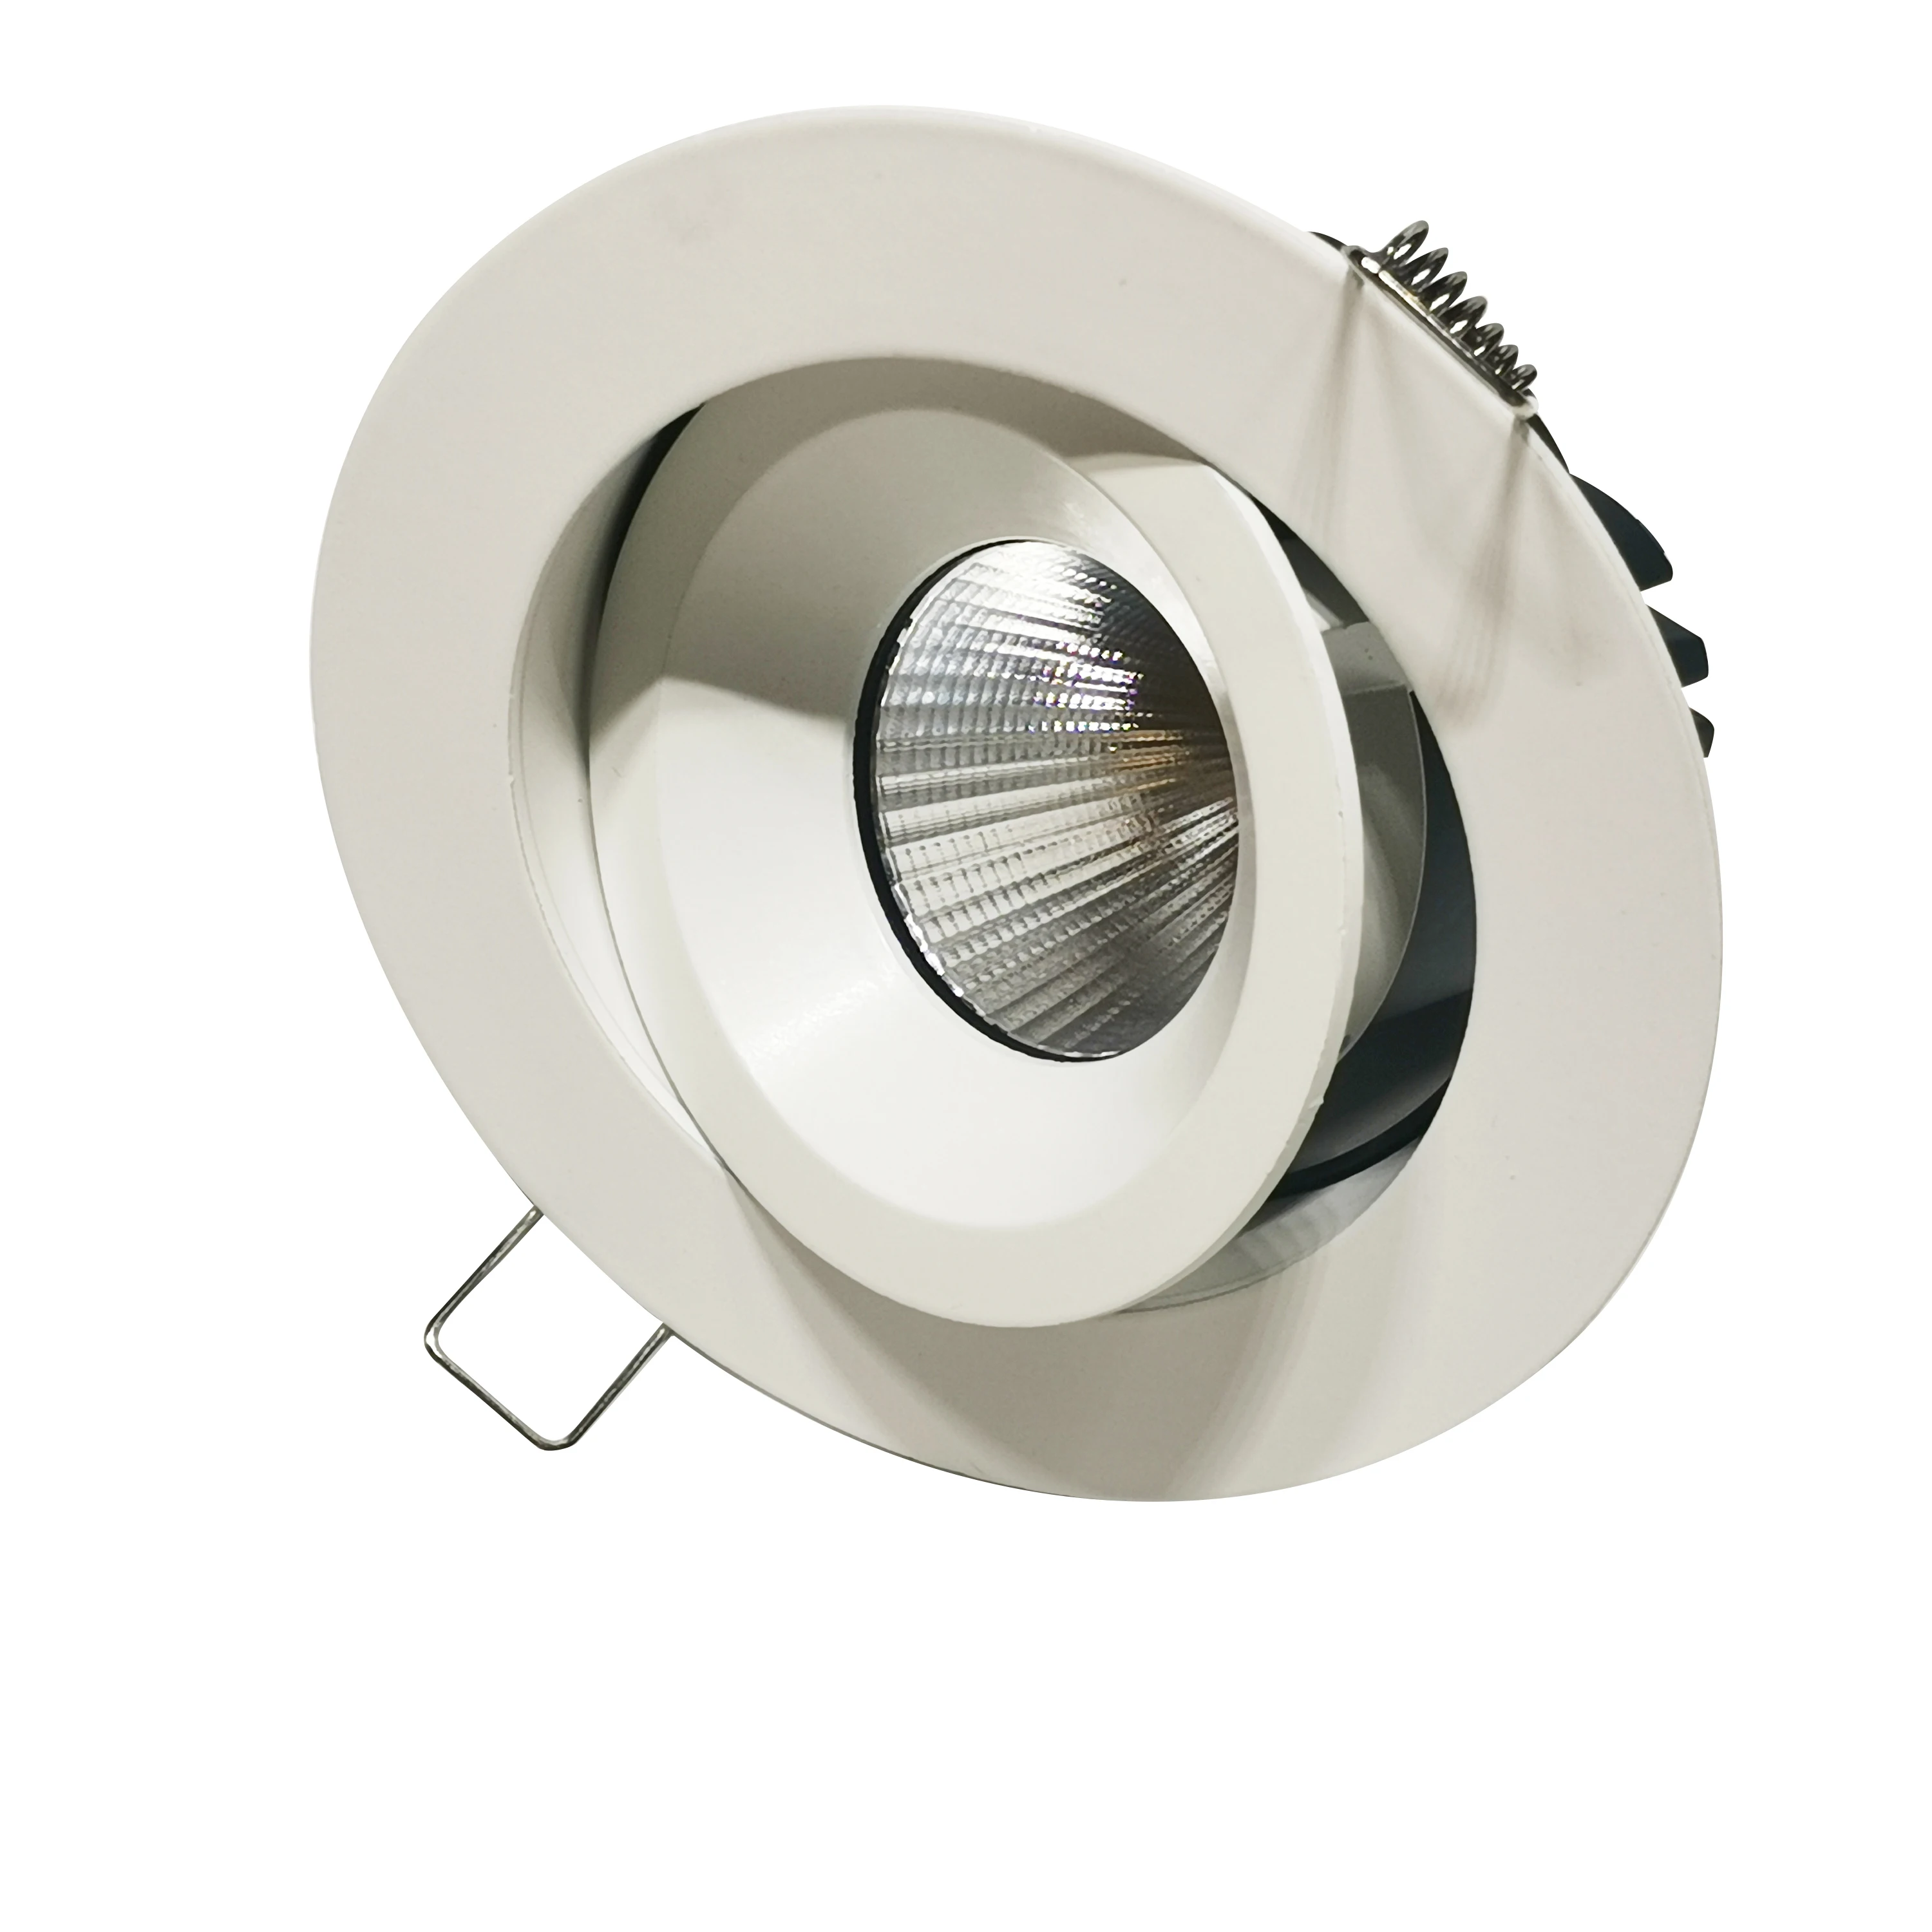 Chinese company's high-star products ceiling light recessed led spot light